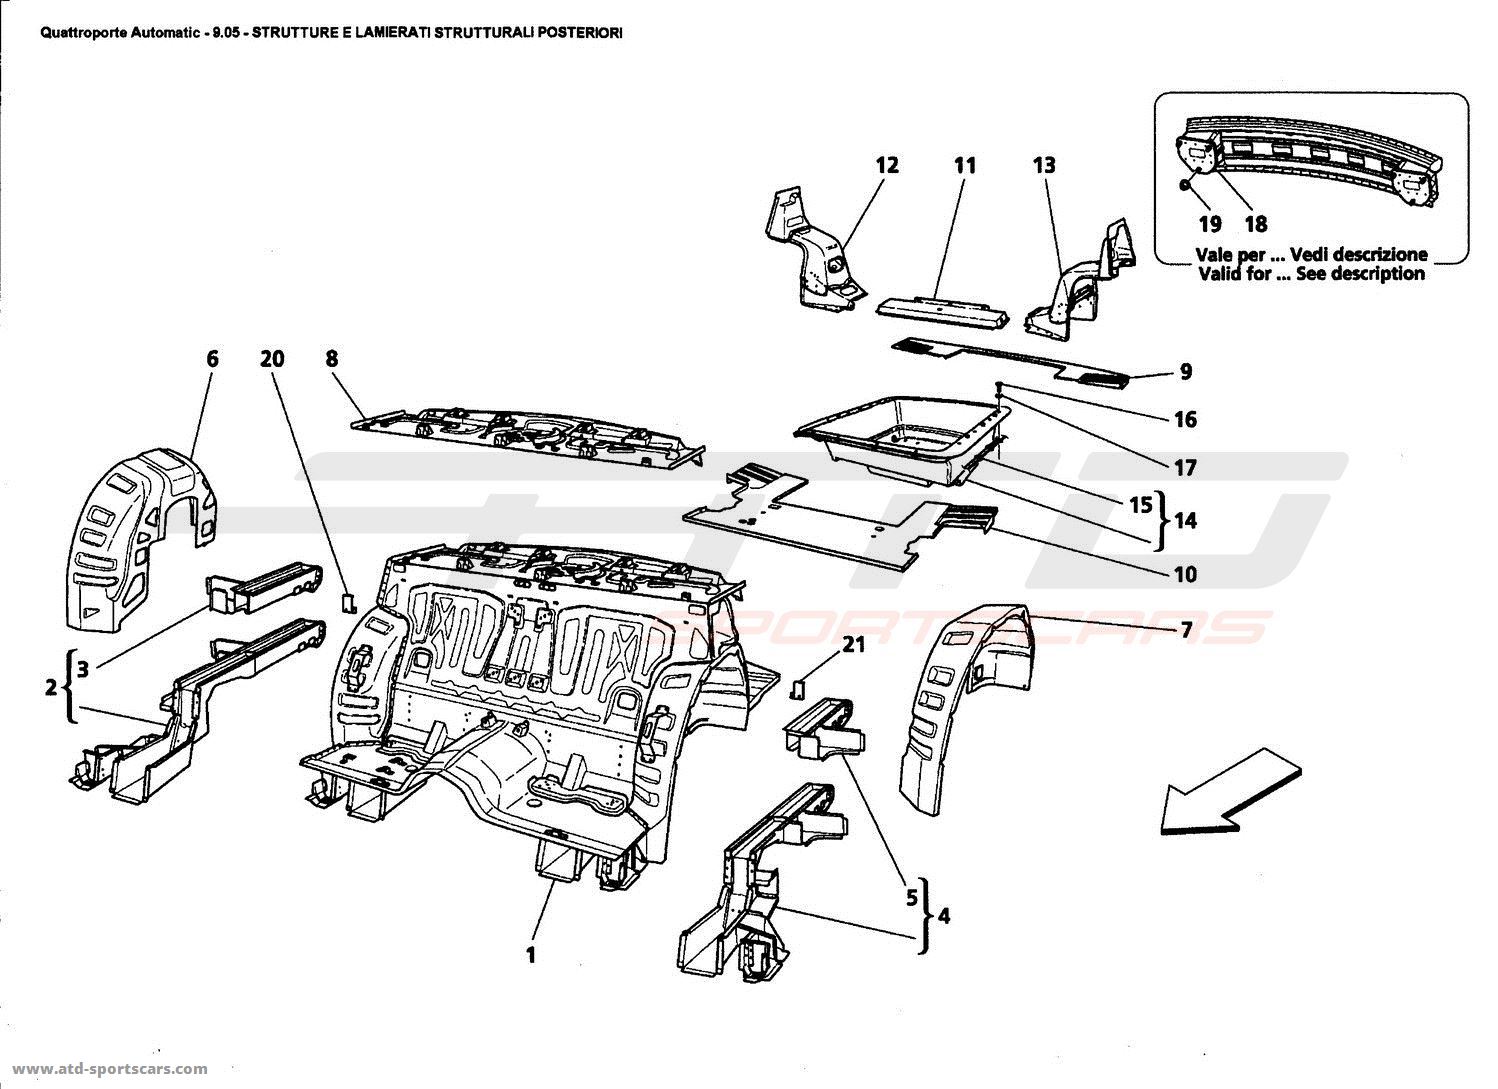 REAR STRUCTURAL PARTS